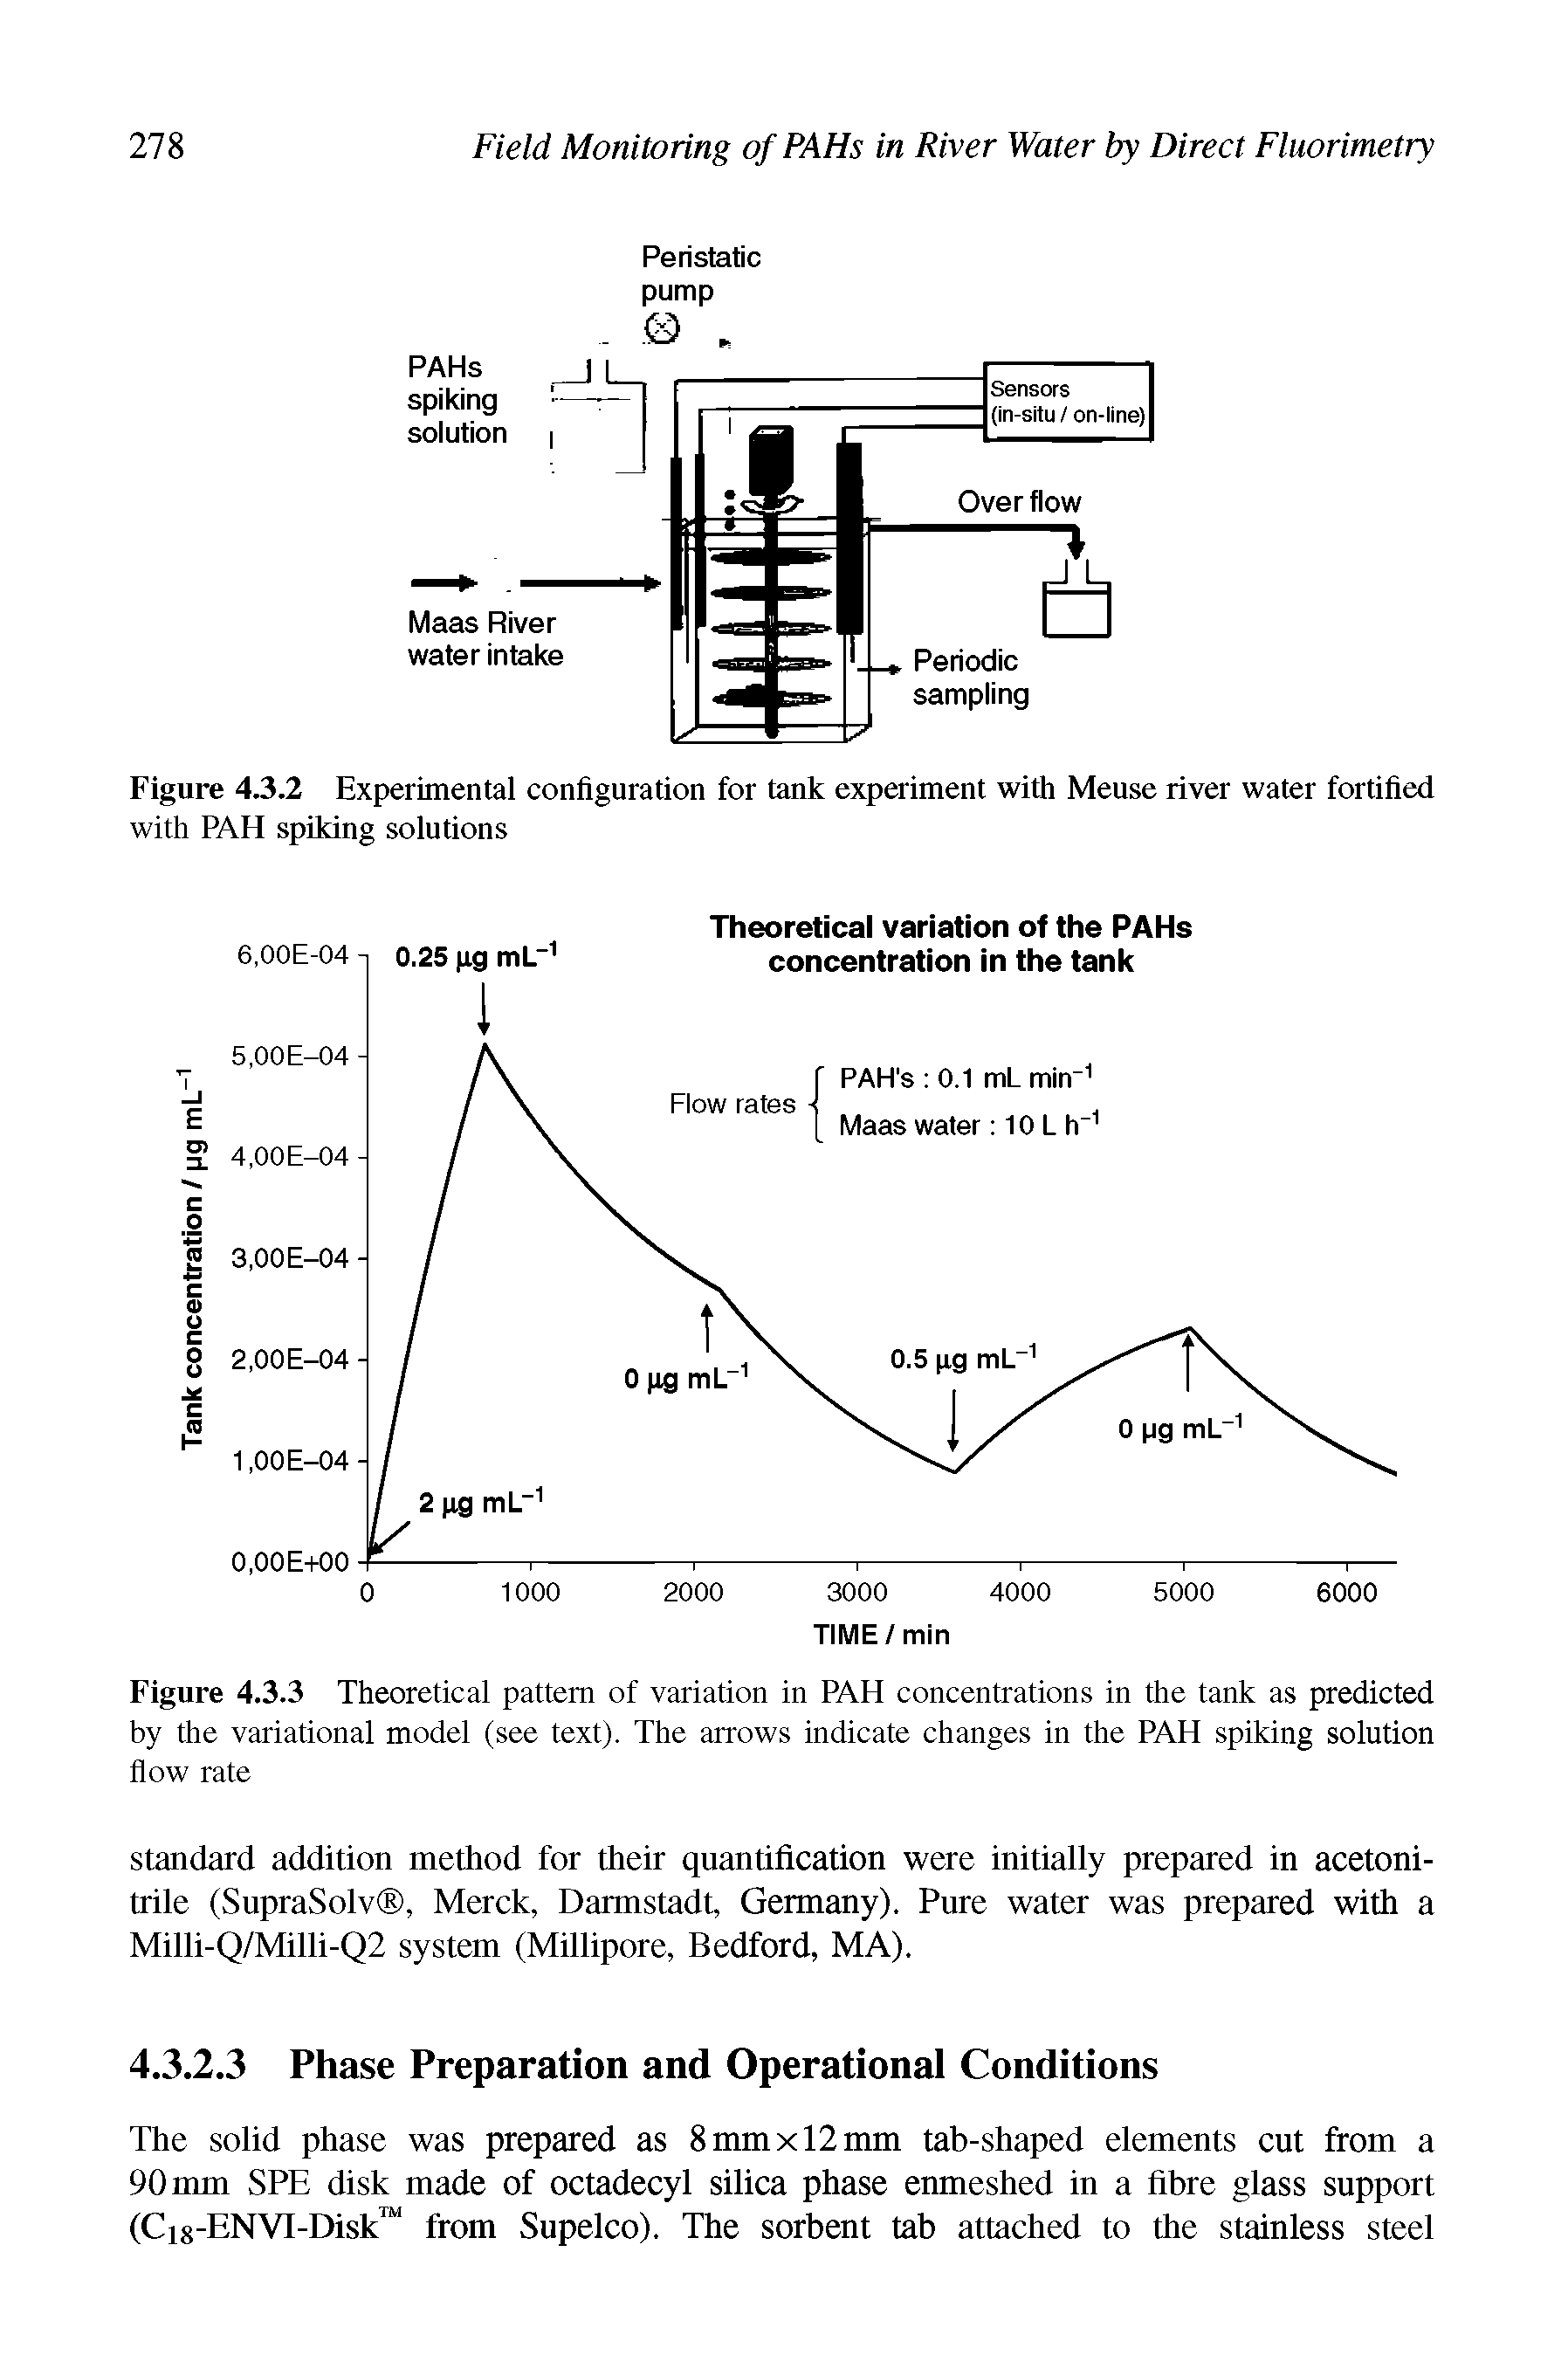 Figure 4.3.3 Theoretical pattern of variation in PAH concentrations in the tank as predicted by the variational model (see text). The arrows indicate changes in the PAH spiking solution flow rate...